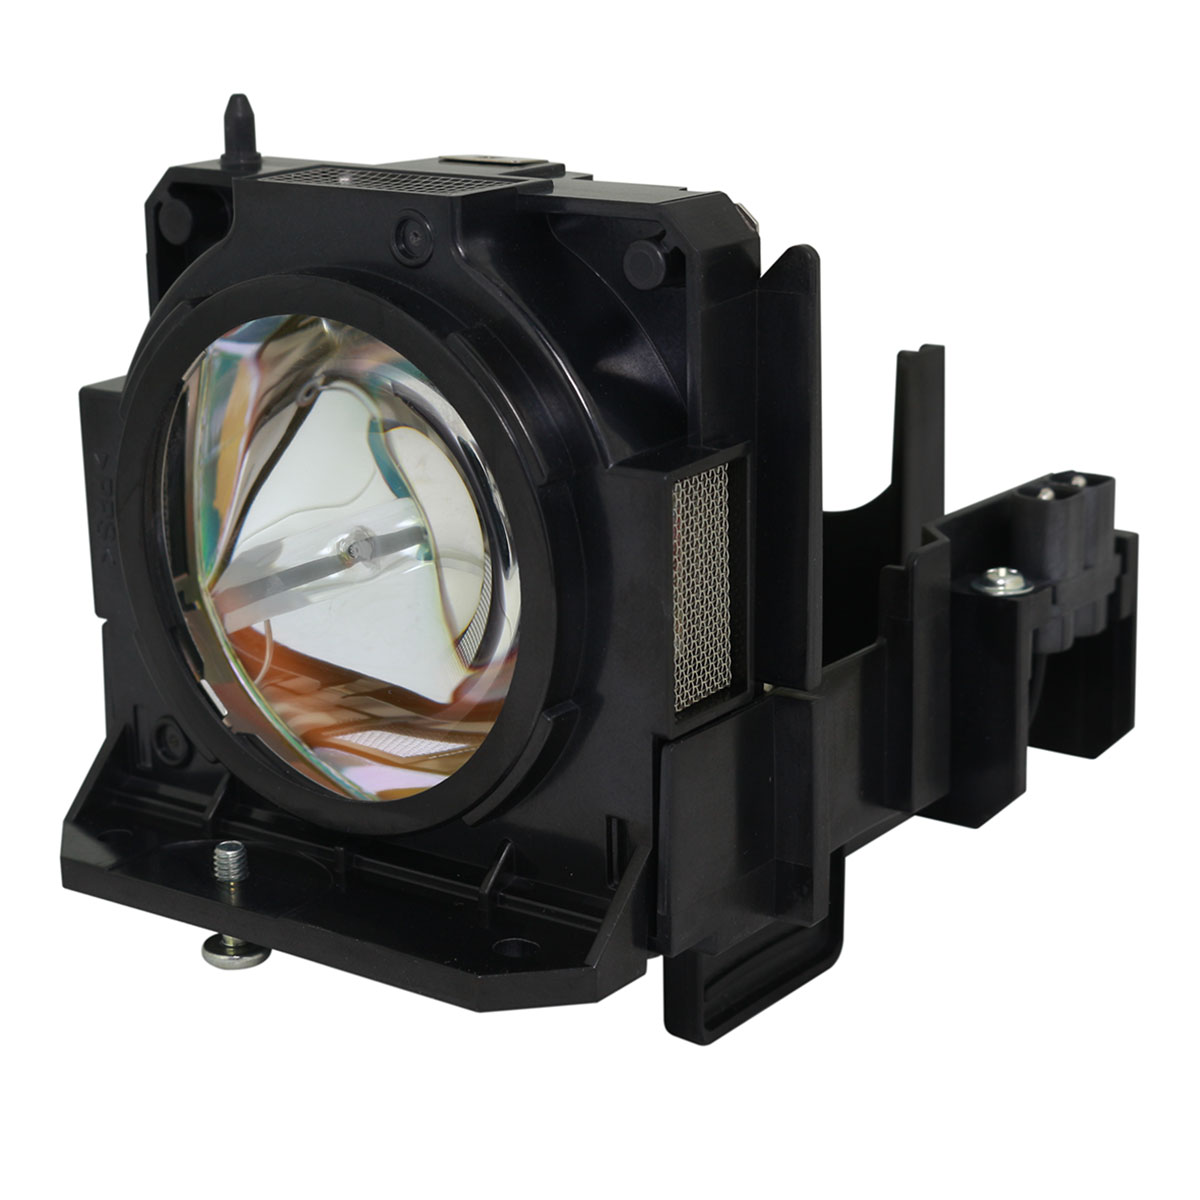 OEM ET-LAD70AW Lamp & Housing Twinpack for Panasonic Projectors - 1 Year Jaspertronics Full Support Warranty! - image 4 of 9